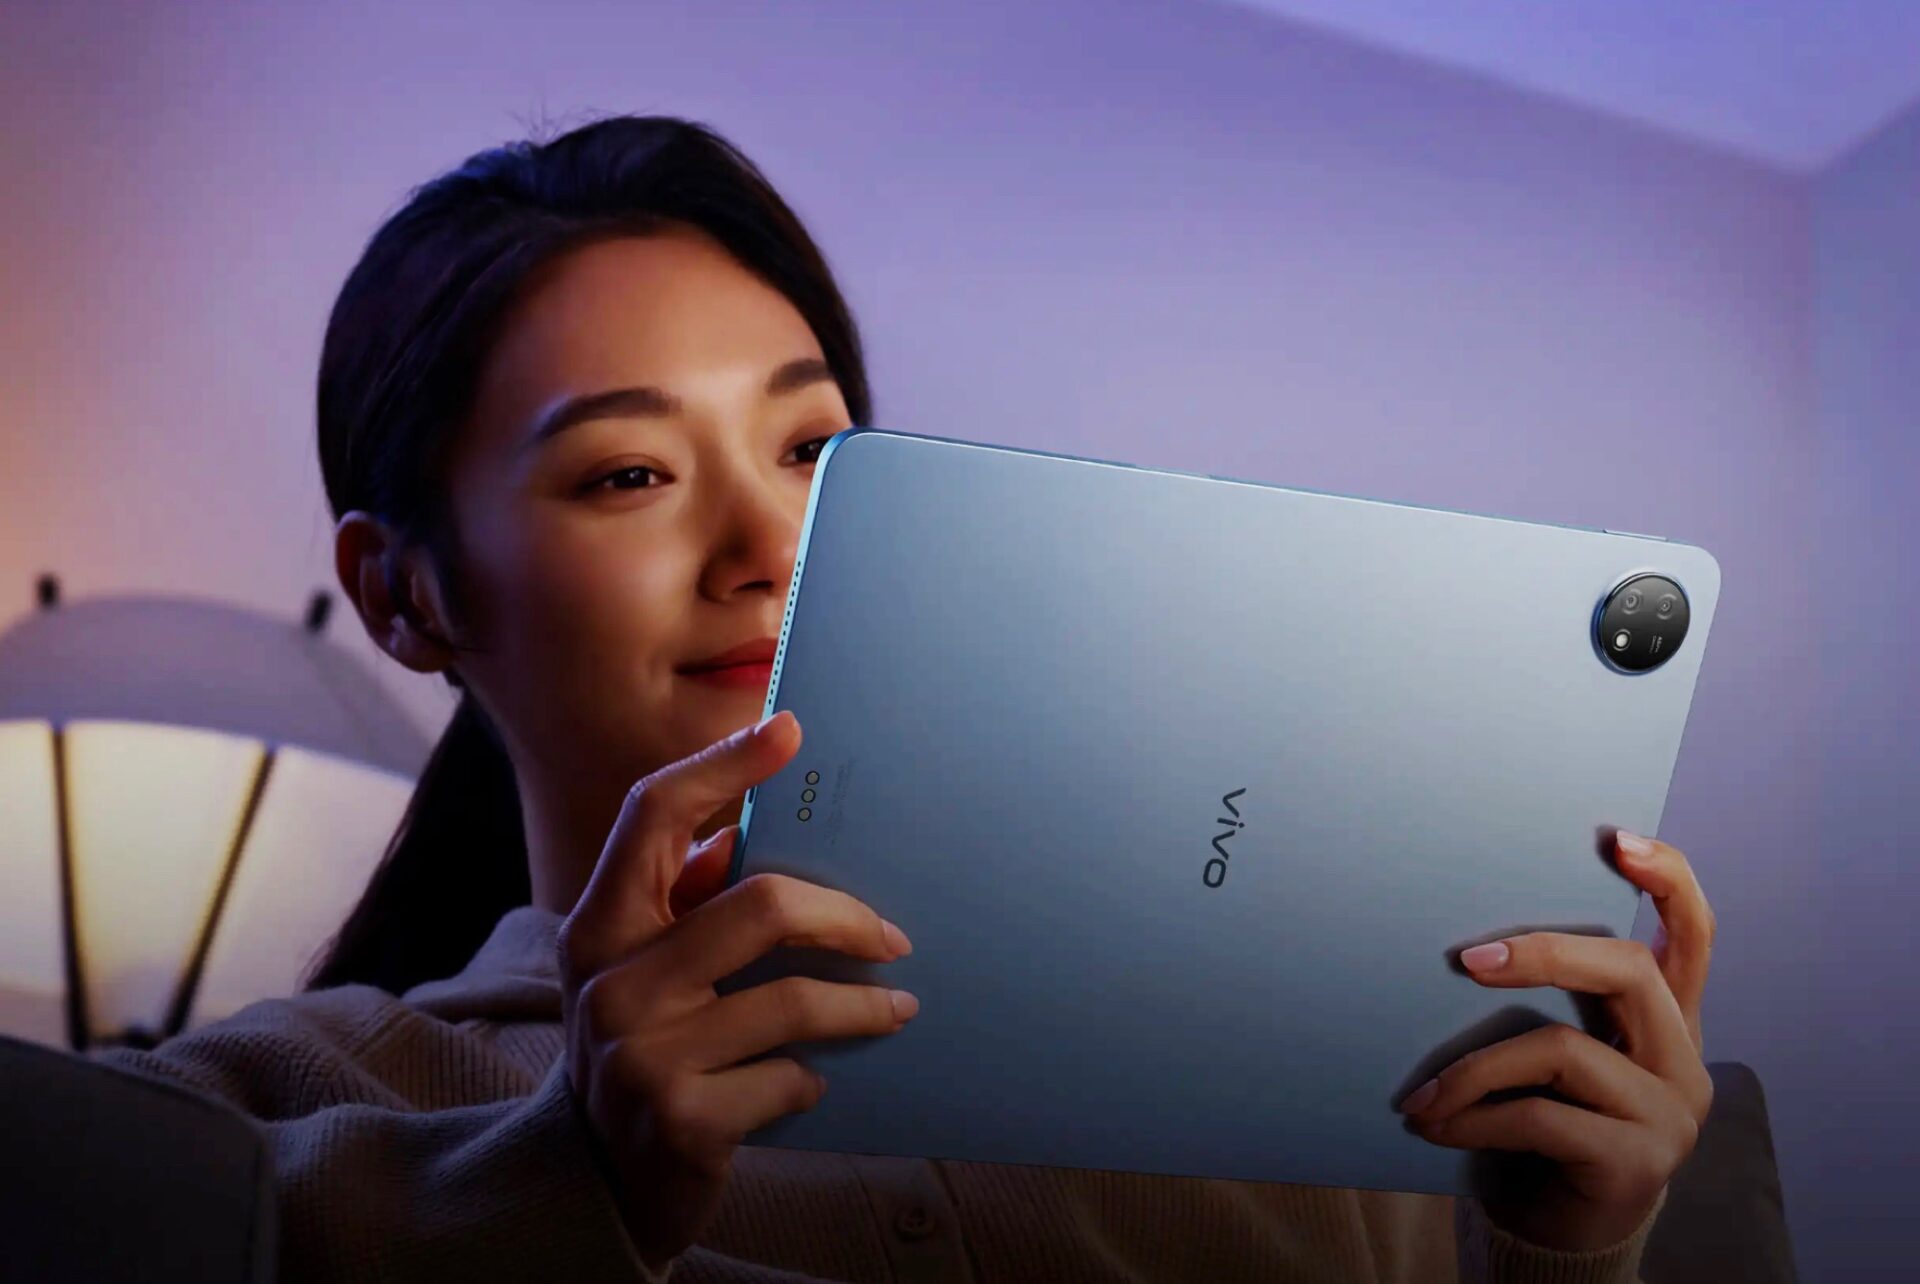 Vivo Pad2 is Official with 144Hz Refresh Rate, Dimensity 9000 SoC & 44W Fast Charging